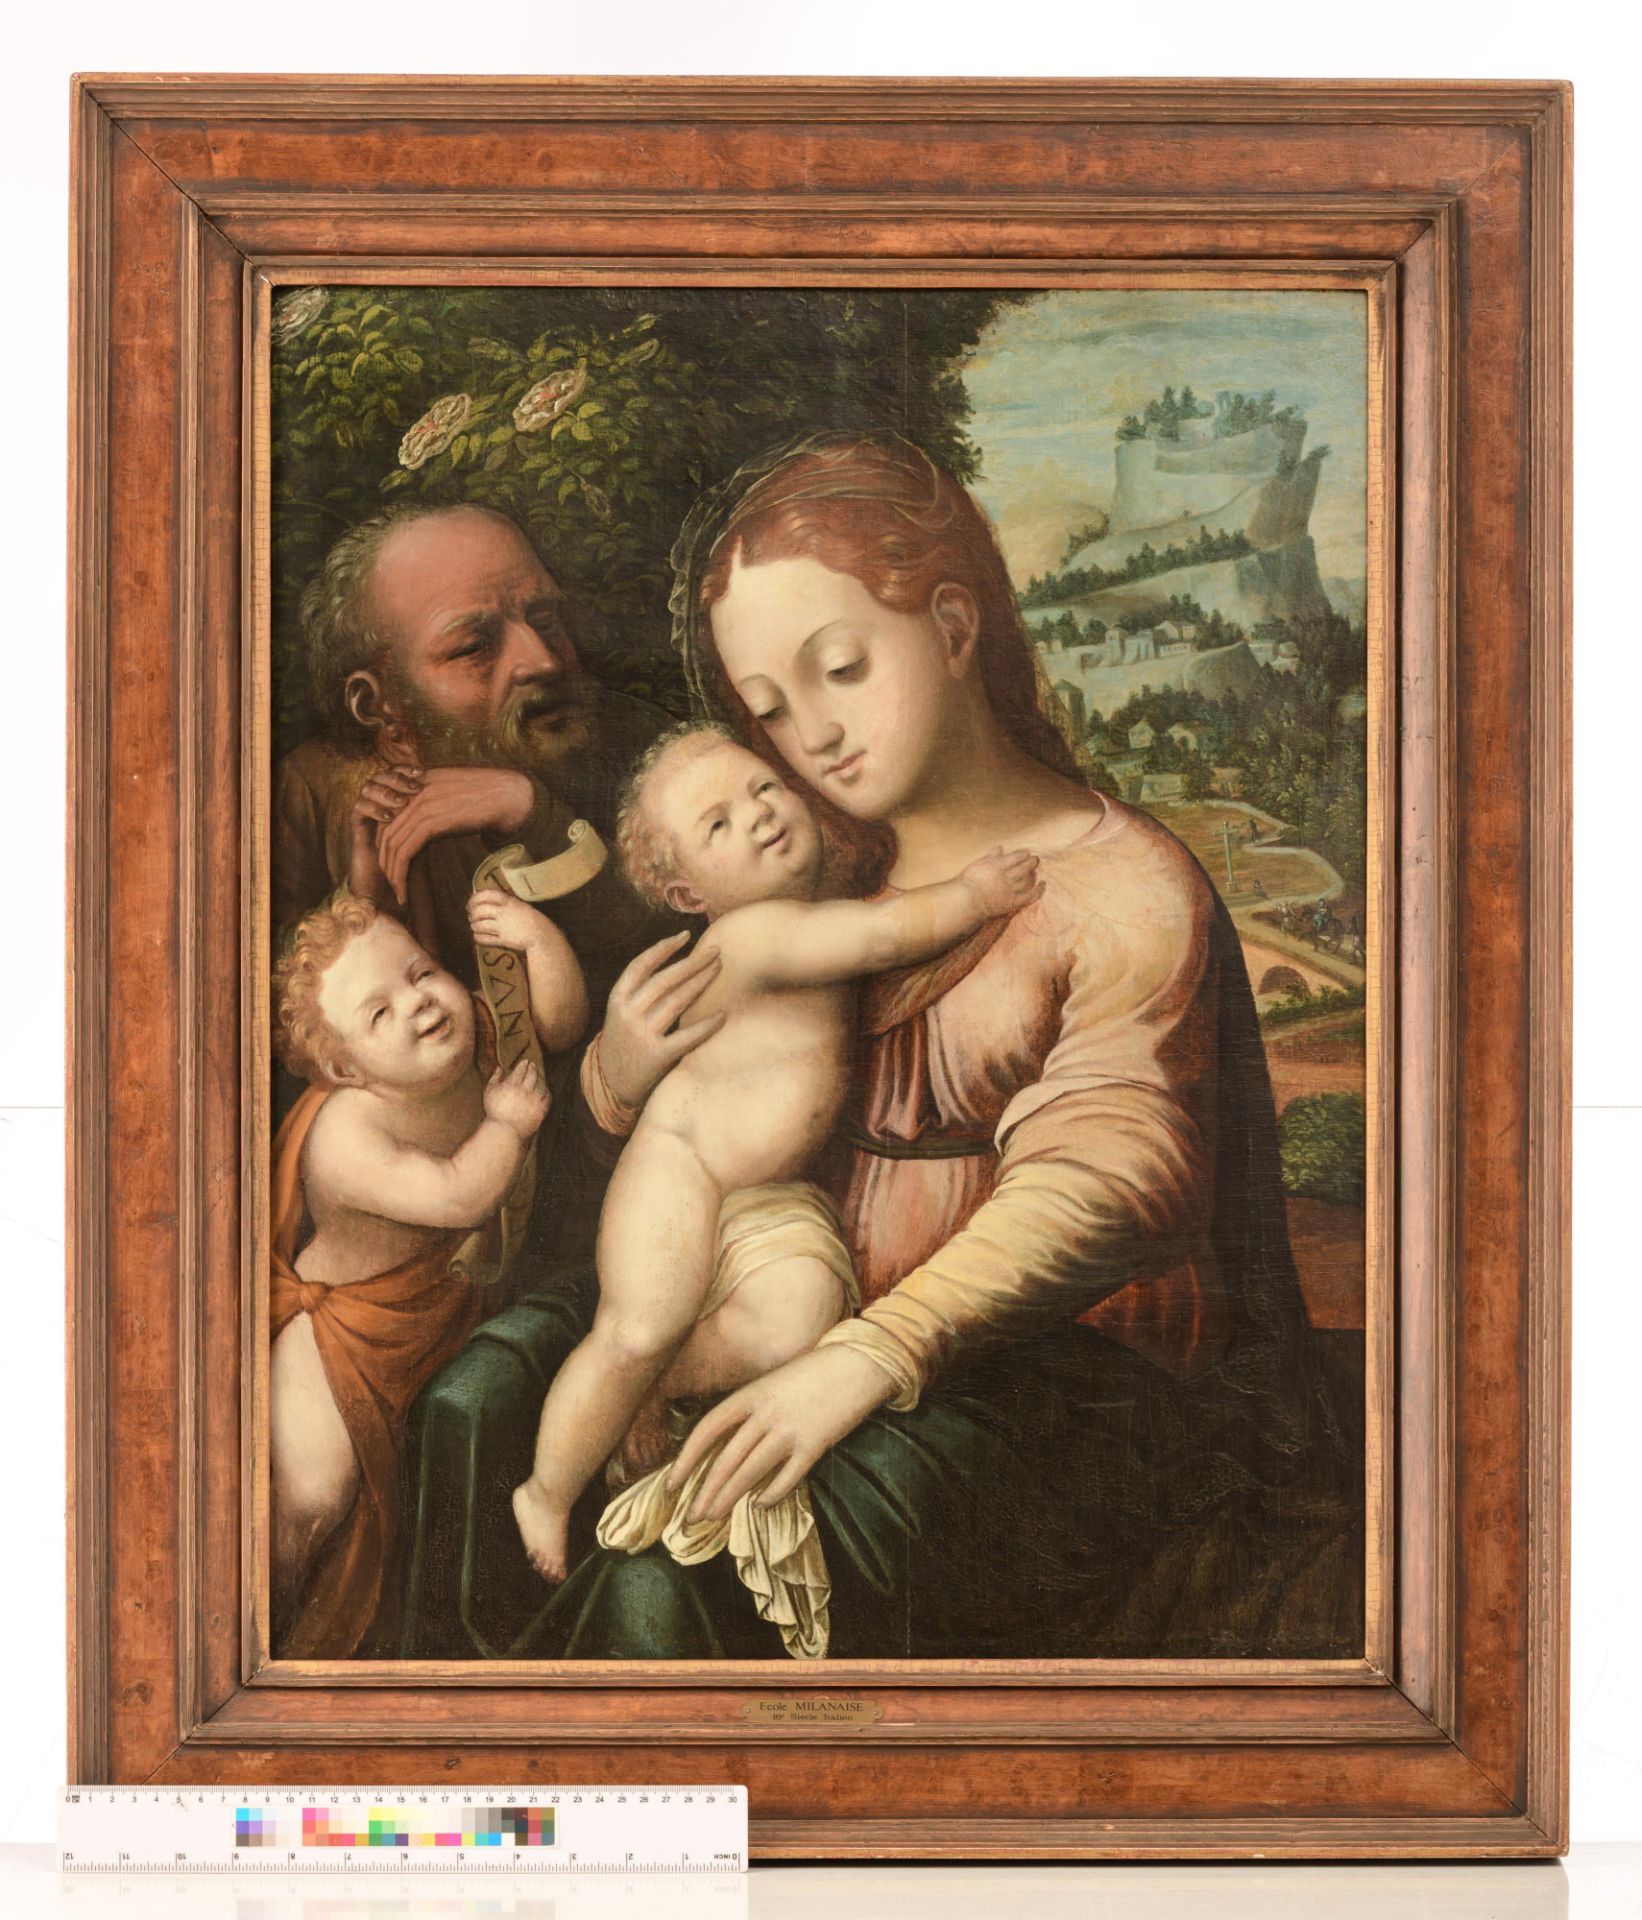 Attributed to the workshop of Quinten Metsys (1466-1530), 63 x 51 cm - Image 12 of 12